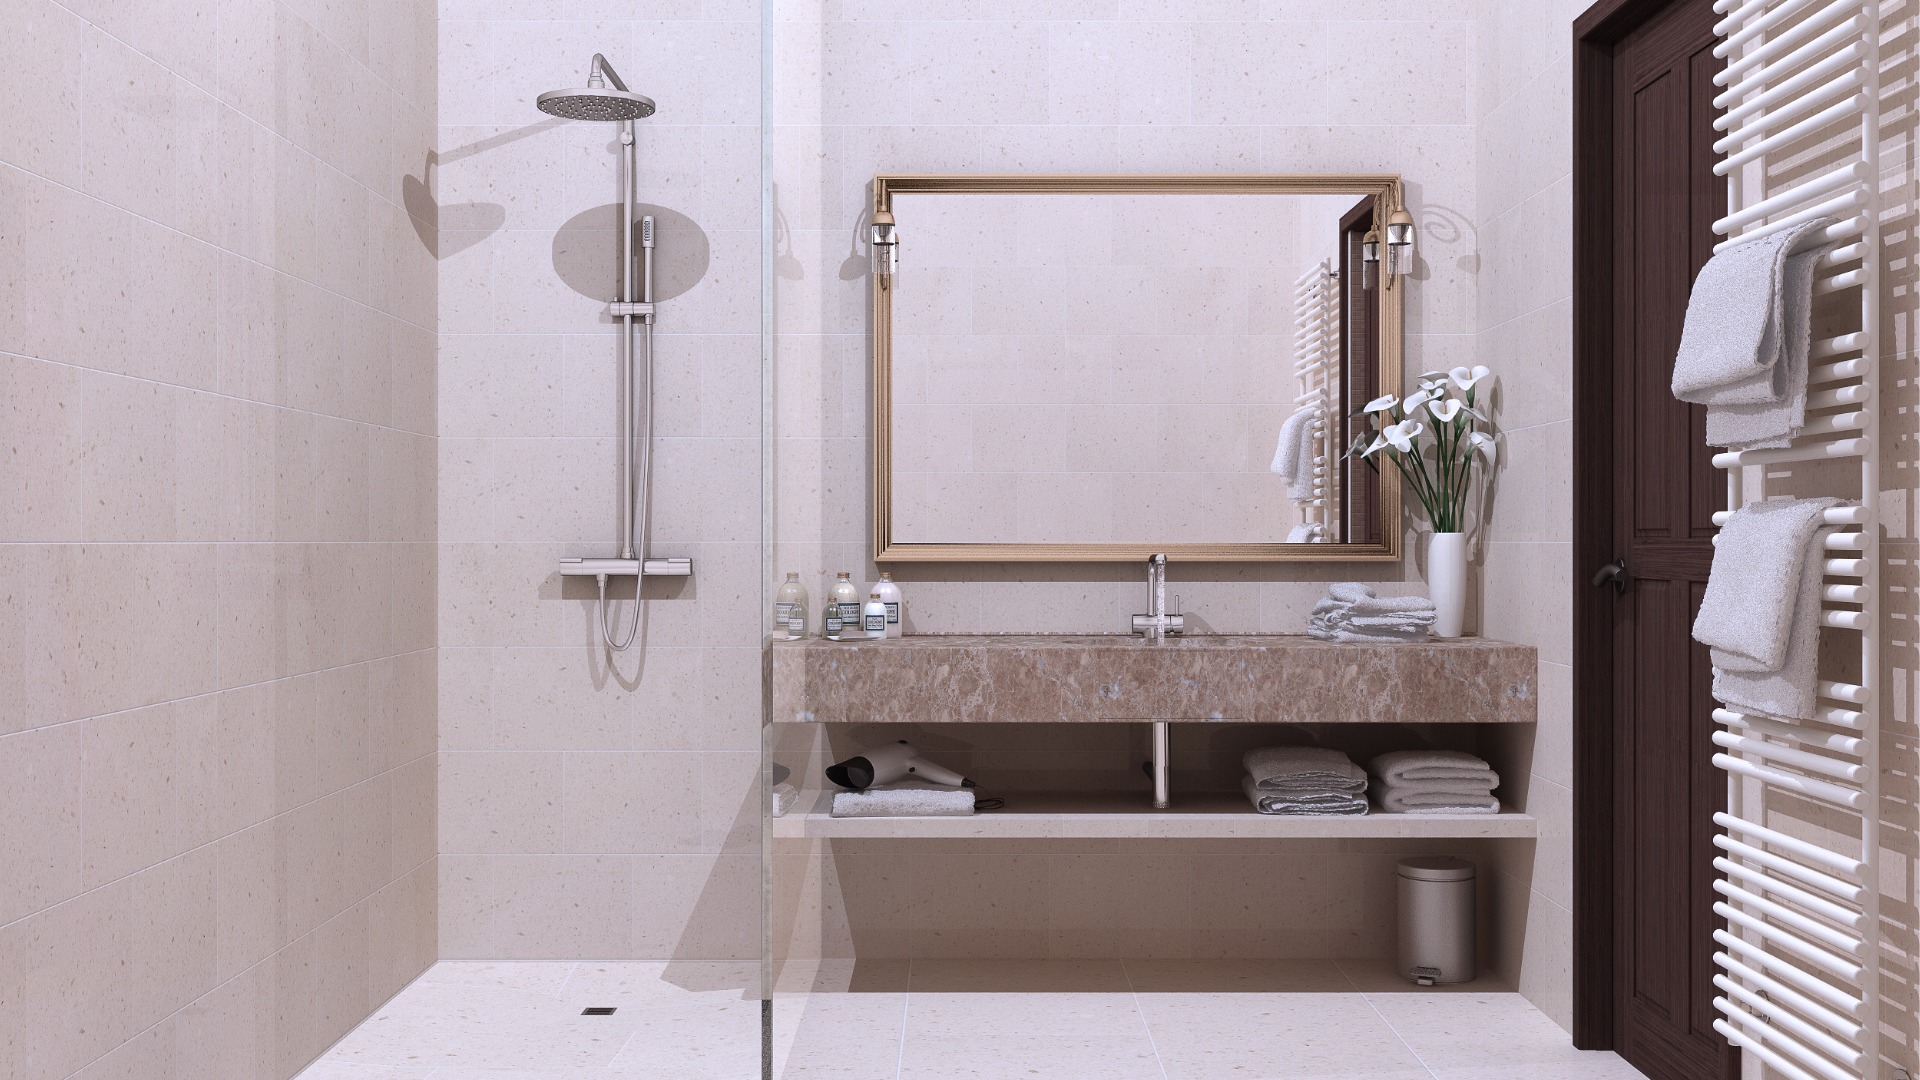 This image shows a hotel bathroom with a walk-in shower, a sink, a mirror and a towel warmer on the wall. Featuring walk-in showers instead of bathtubs is one of the main differences between American and European hotels. 